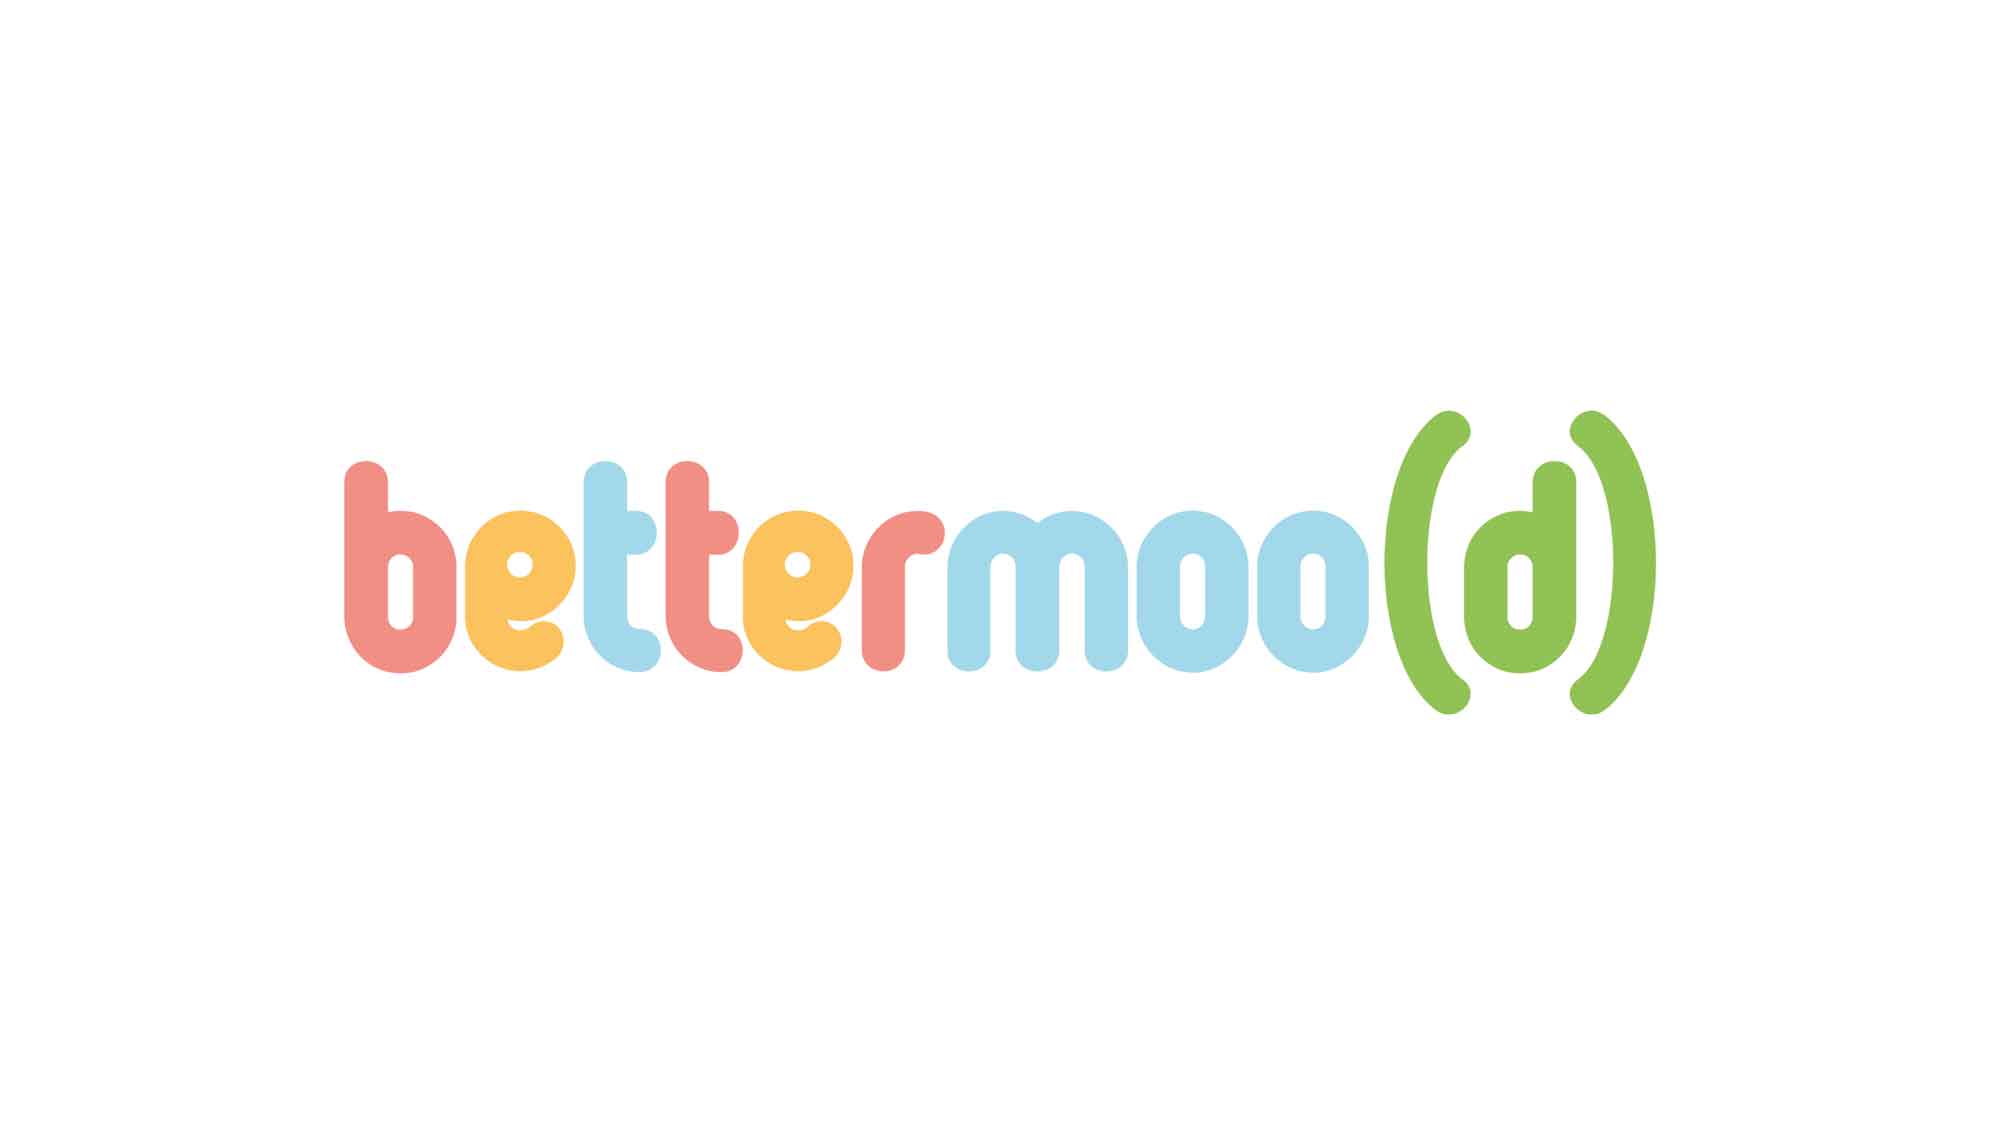 Bettermoo(d) Pens Retail Listing with One of Canada’s Largest Grocers, Metro Inc., for Moodrink Dairy Alternative